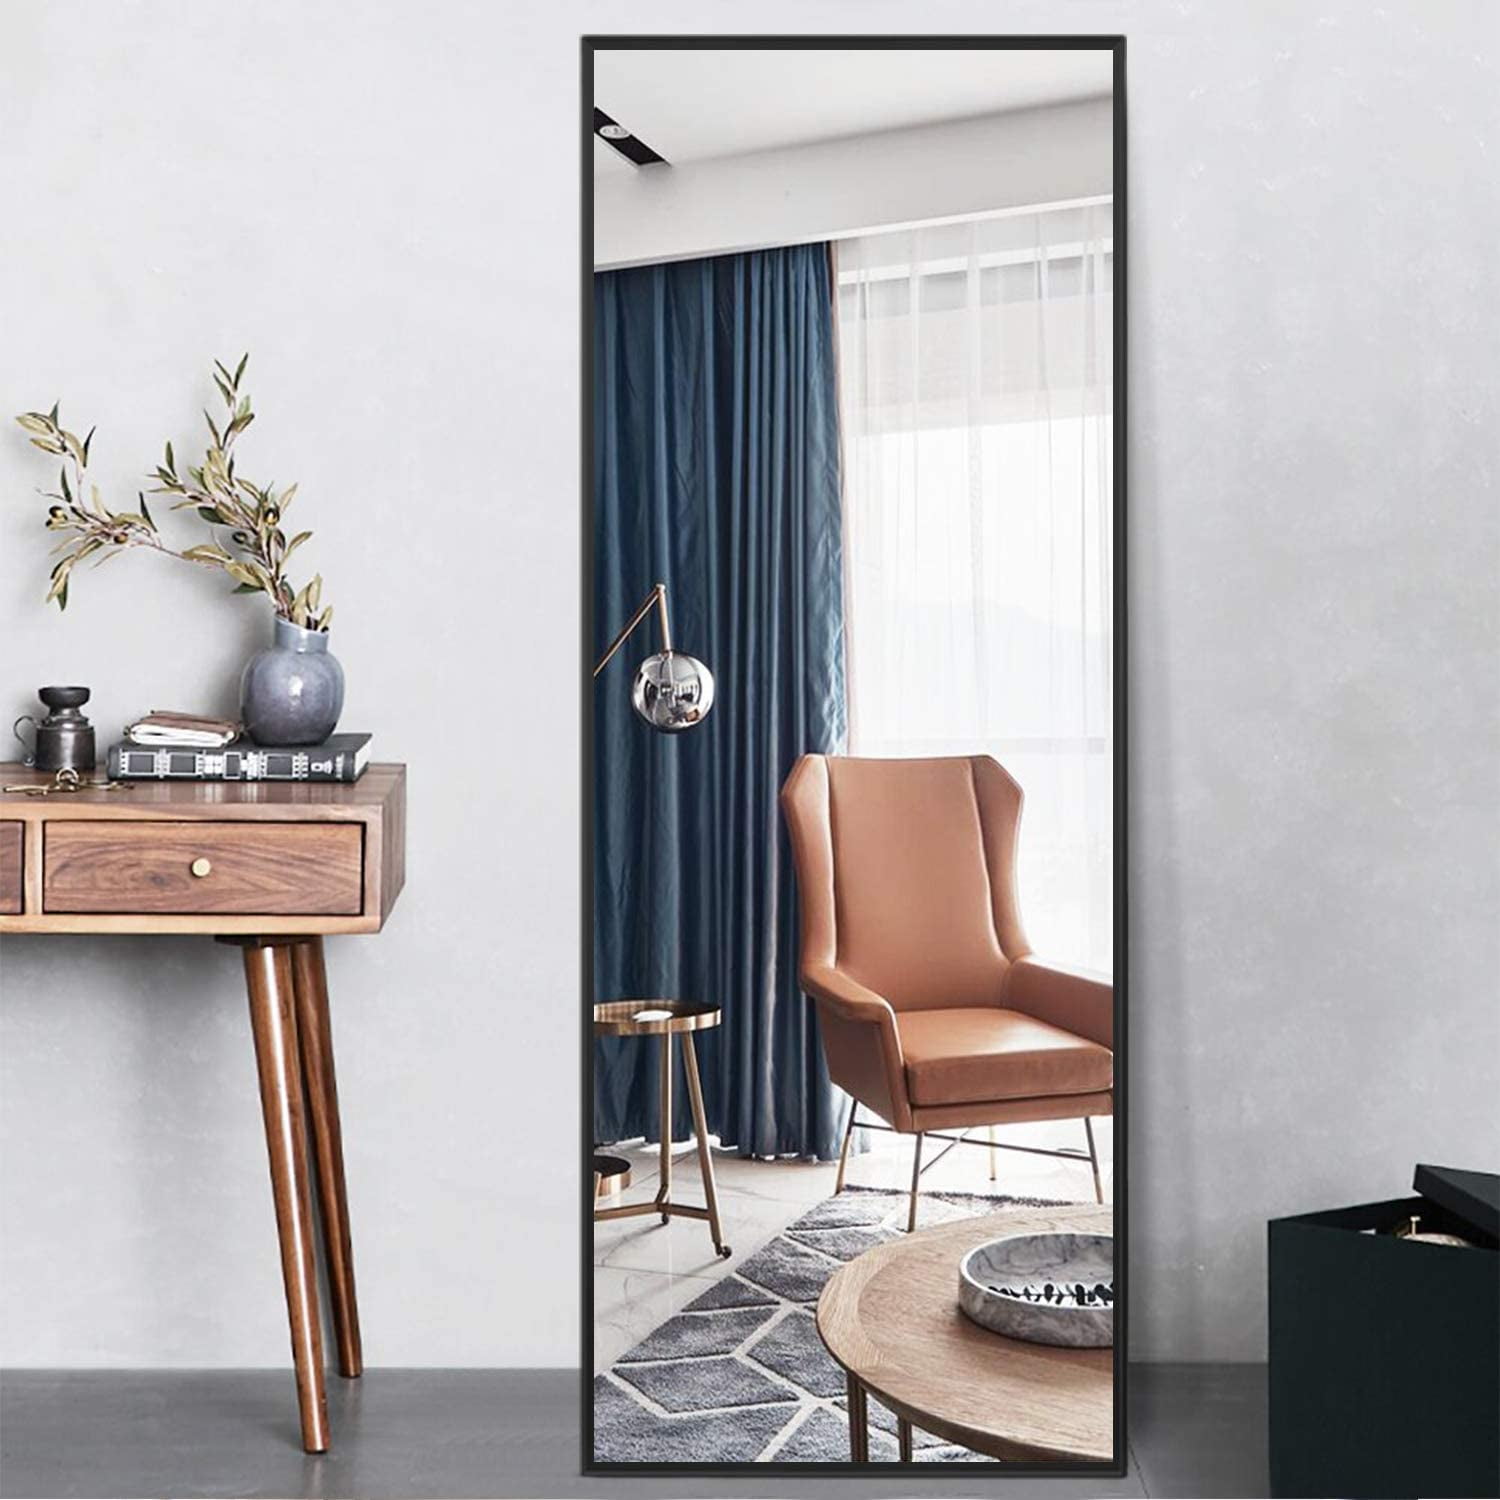 Full Length Mirror Floor Mirror Hanging/Leaning Large Wall Mounted